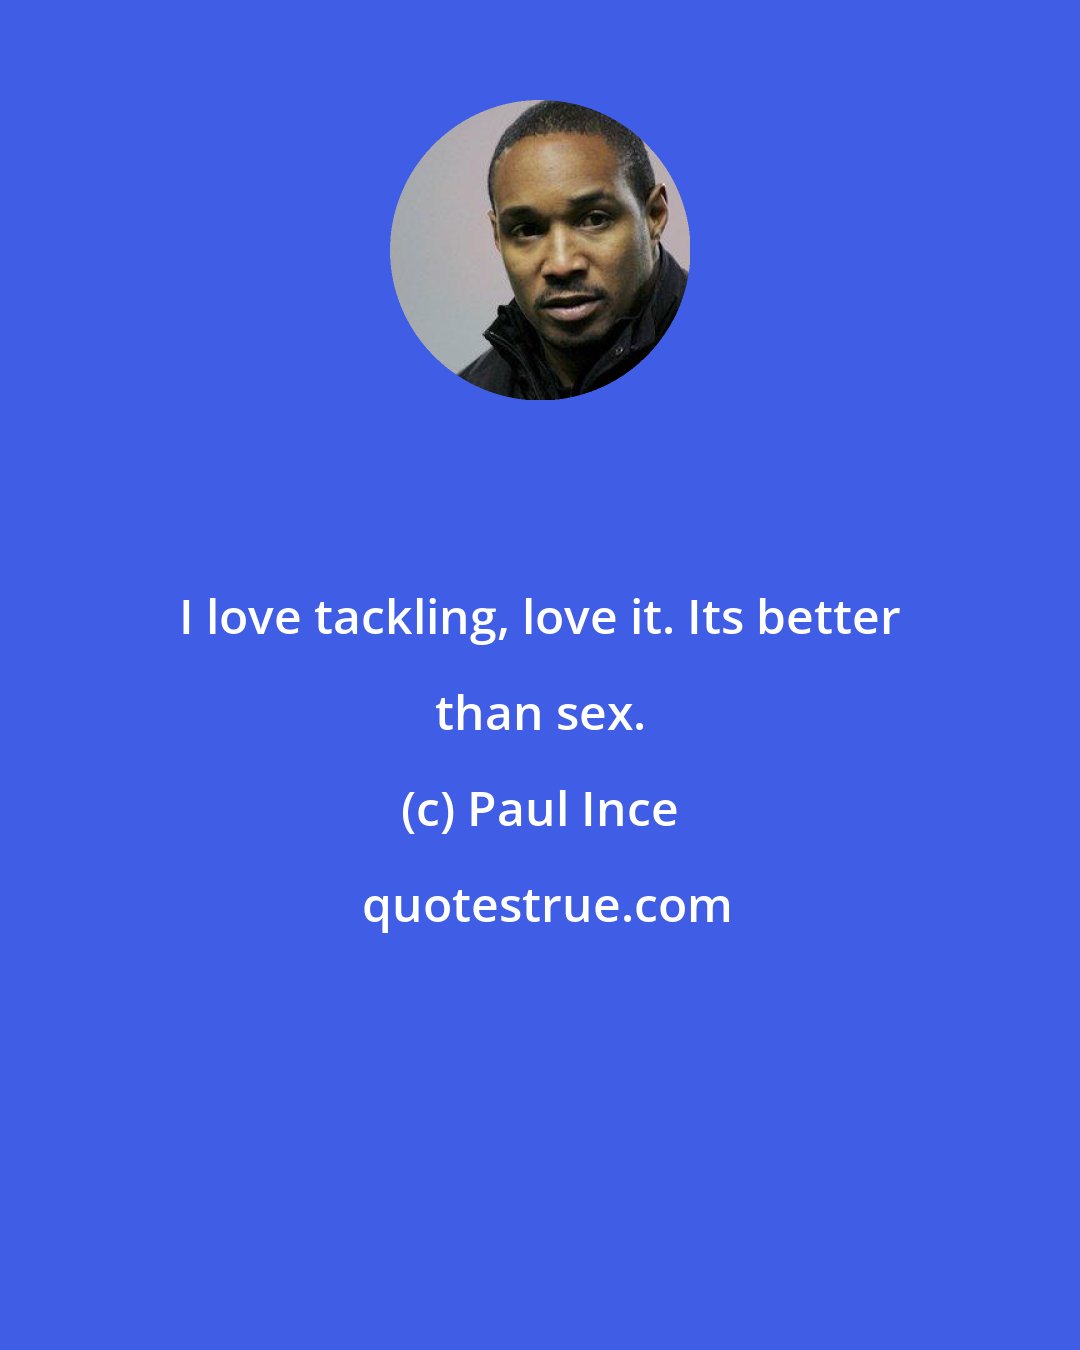 Paul Ince: I love tackling, love it. Its better than sex.